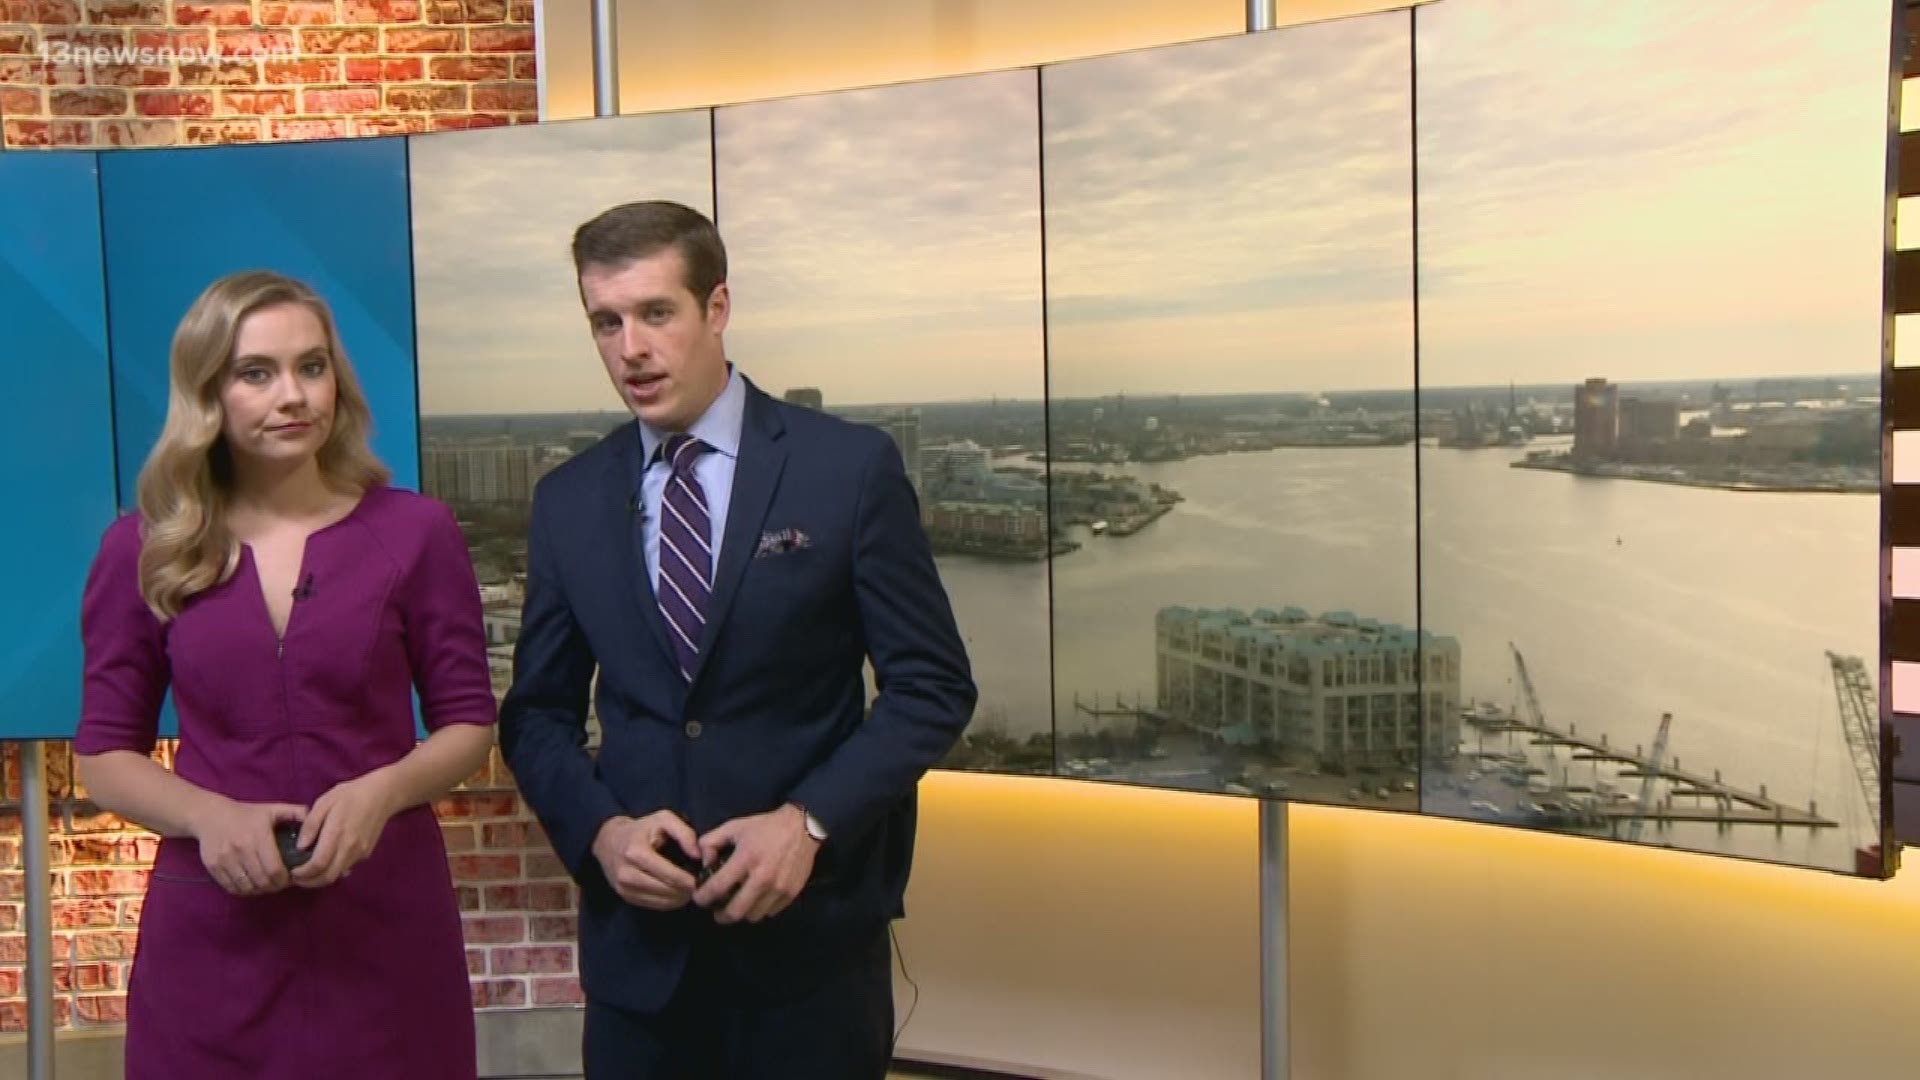 13News Now Top Headlines at Noon with Kristina Robinson and Dan Kennedy for December 13.